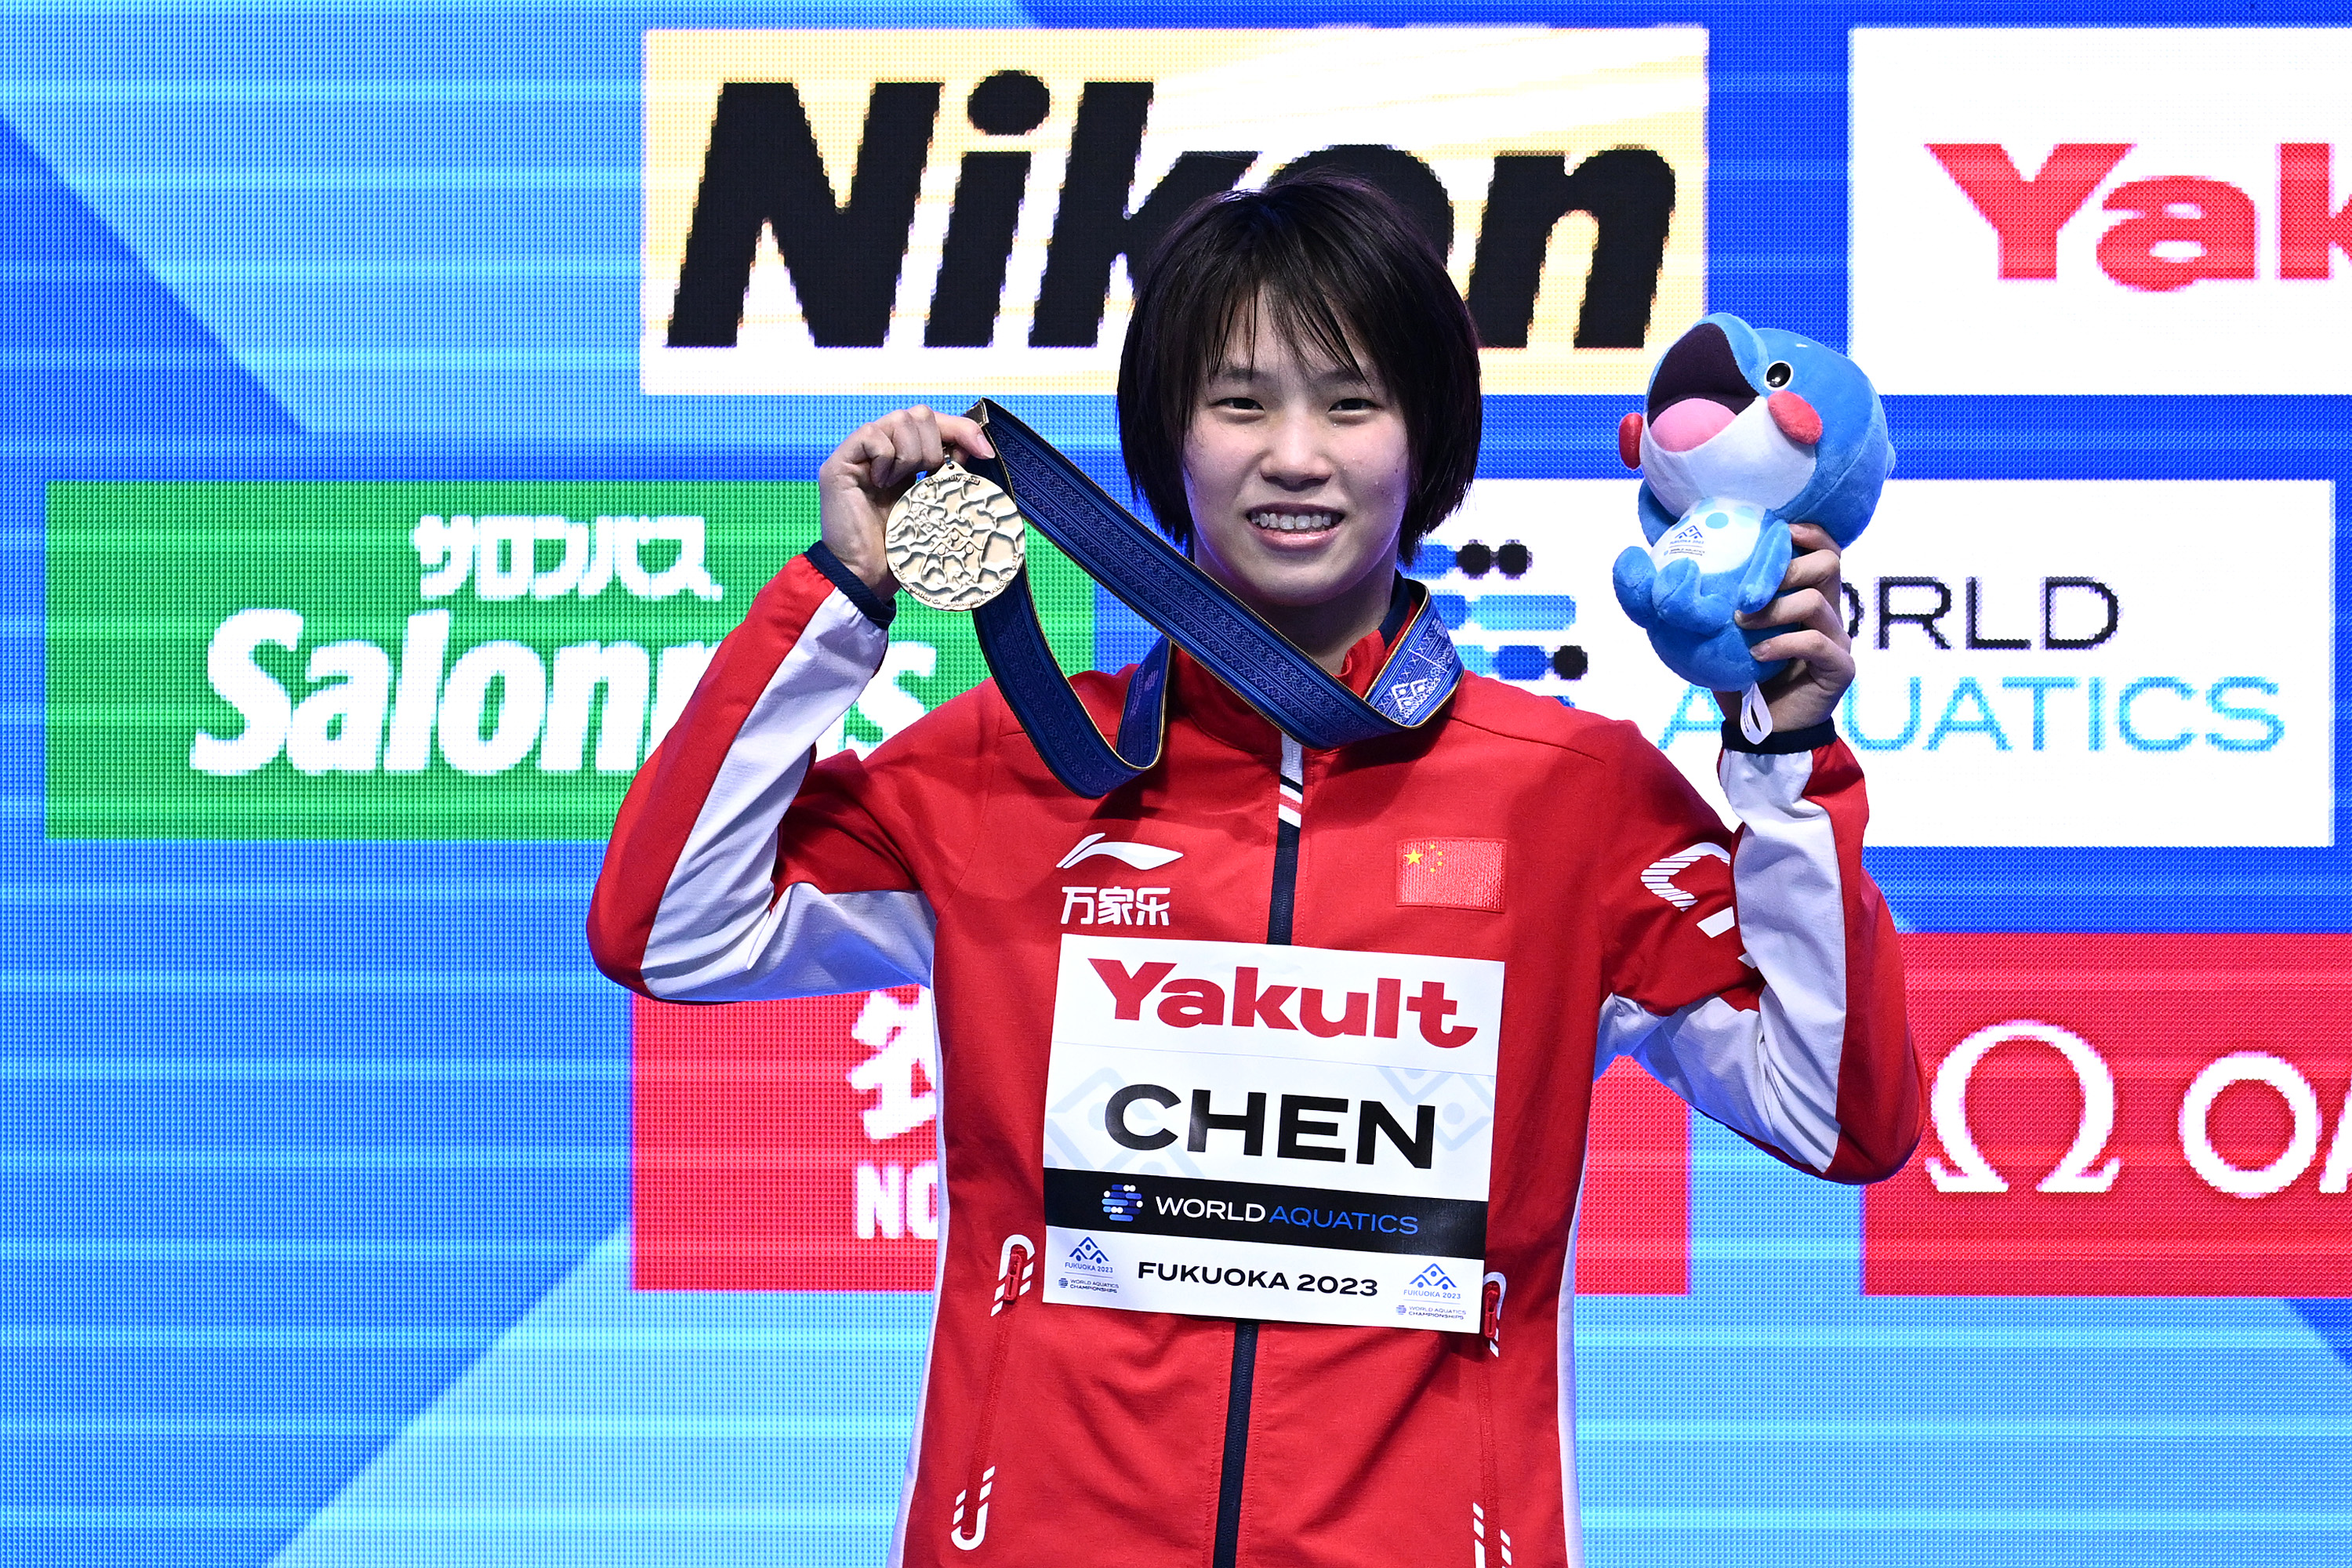 Chen Yuxi of China poses with the gold medal after winning the women's 10-meter platform diving final at the World Aquatics Championships in Fukuoka, Japan, July 19, 2023. /CFP